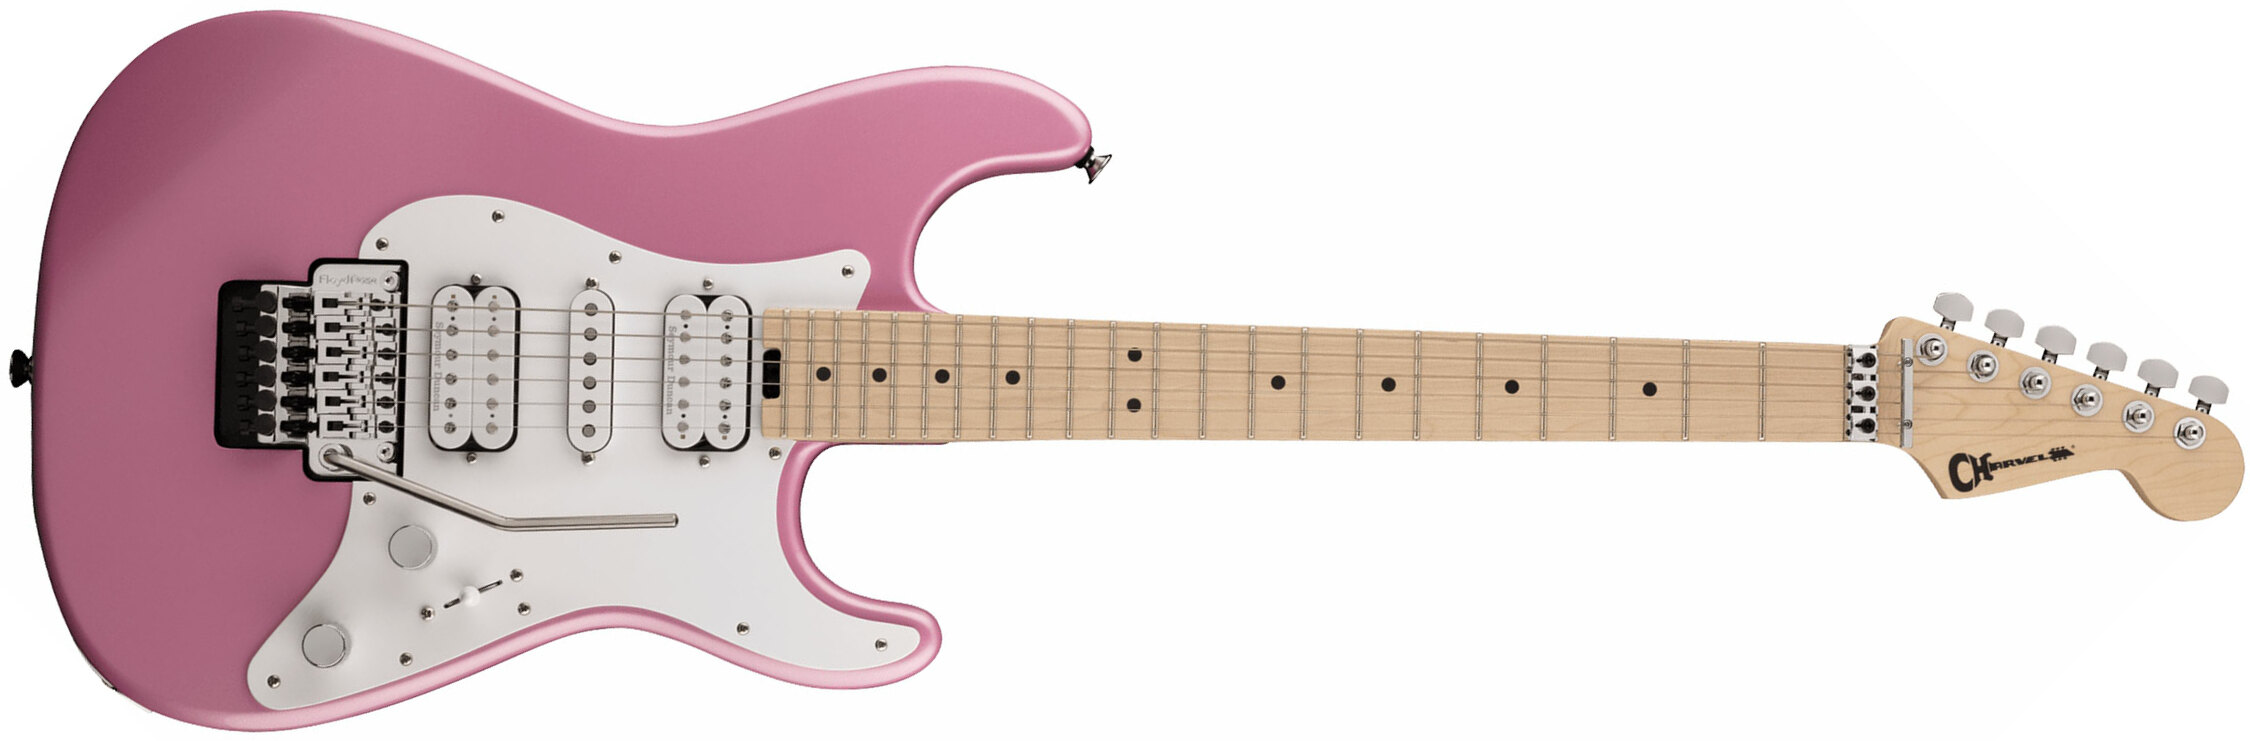 Charvel So-cal Style 1 Hsh Fr M Pro-mod Seymour Duncan Mn - Platinum Pink - E-Gitarre in Str-Form - Main picture